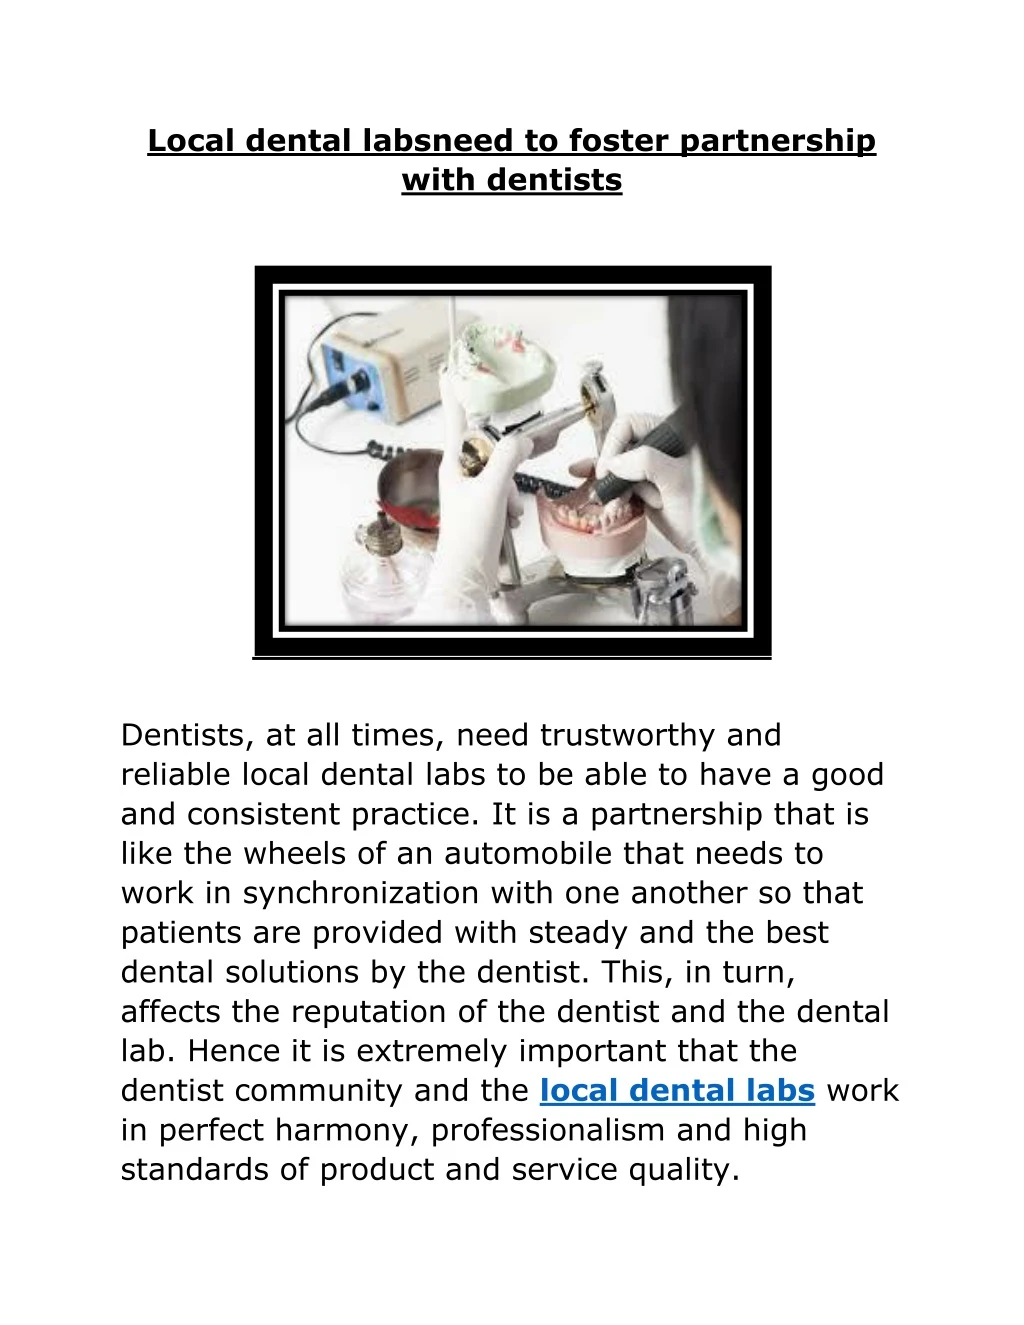 local dental labsneed to foster partnership with